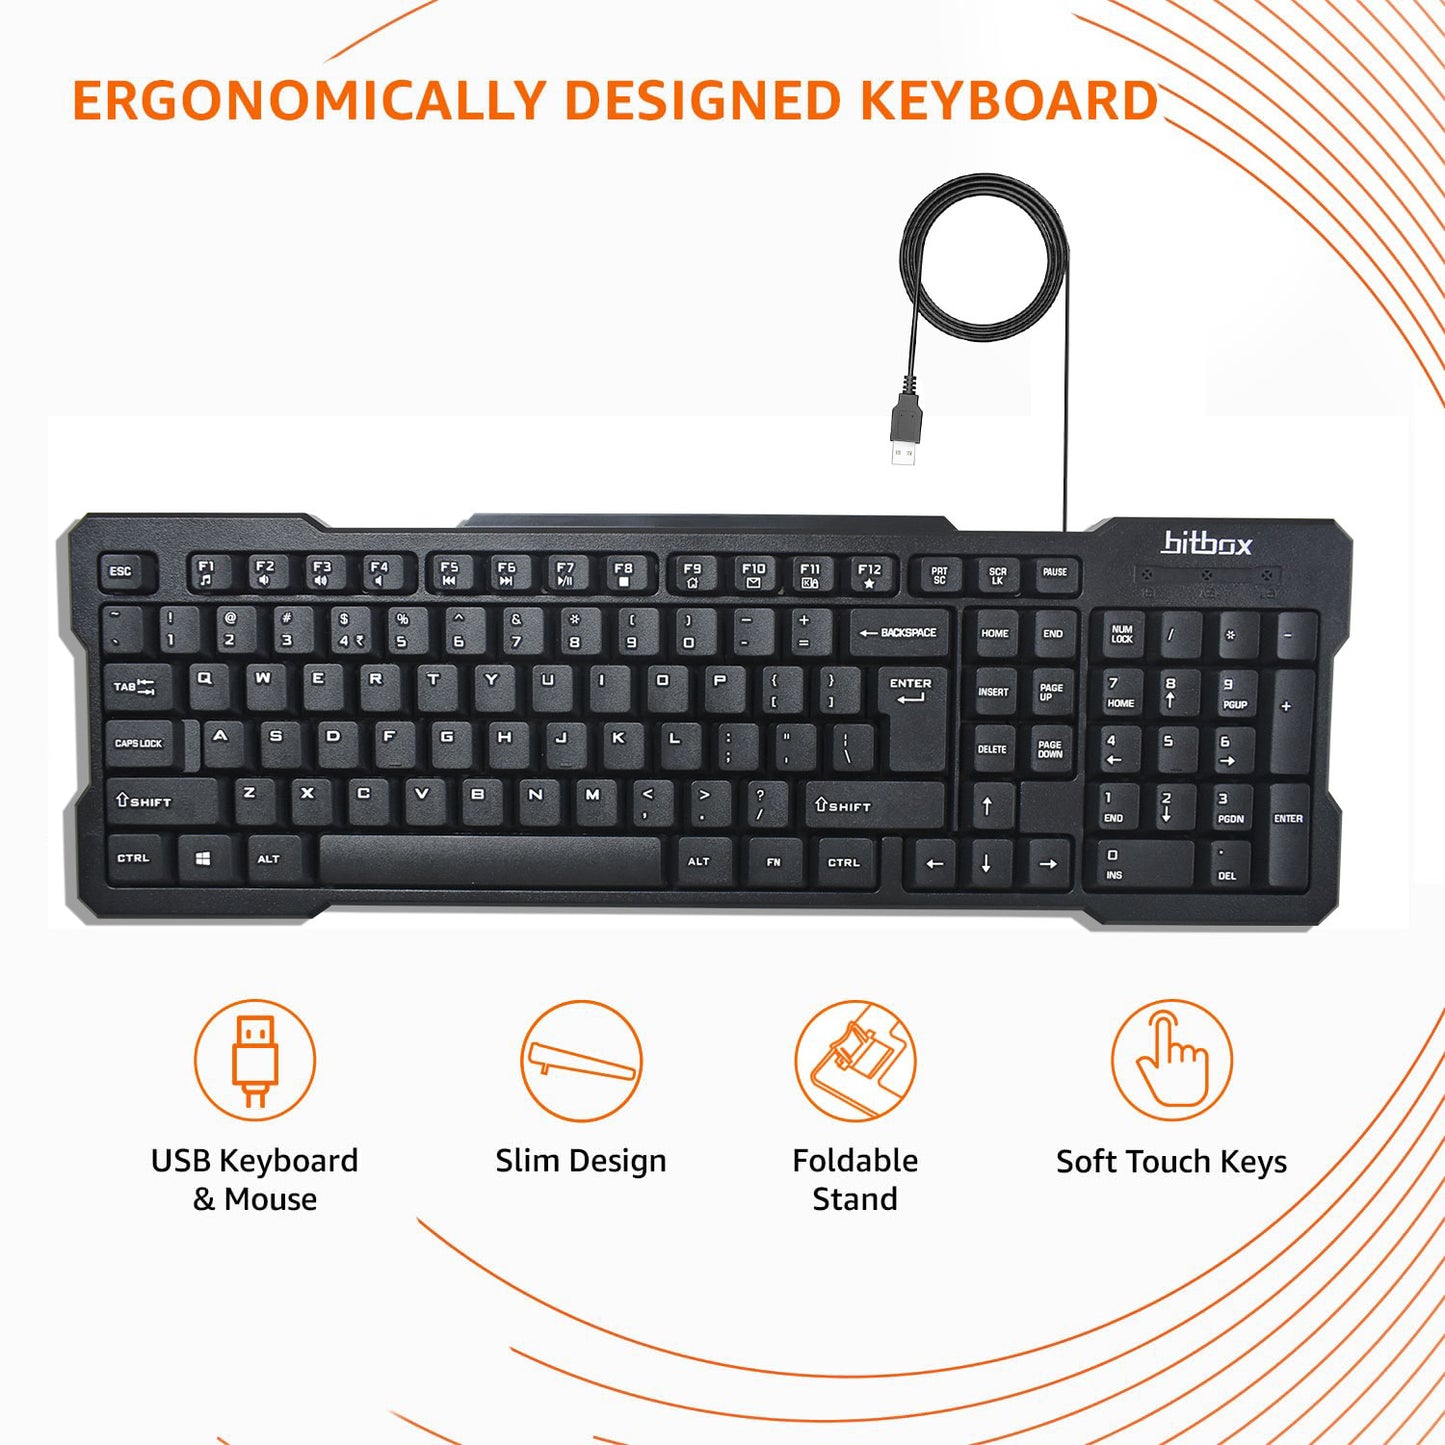 Bit-io by BitBox BBKM02 Wired Keyboard and Mouse Combo with Instant USB Plug-and-Play Setup, 12 Shortcut Keys, 6° Adjustable Slope Keyboard and 1600 DPI Optical Sensor Mouse